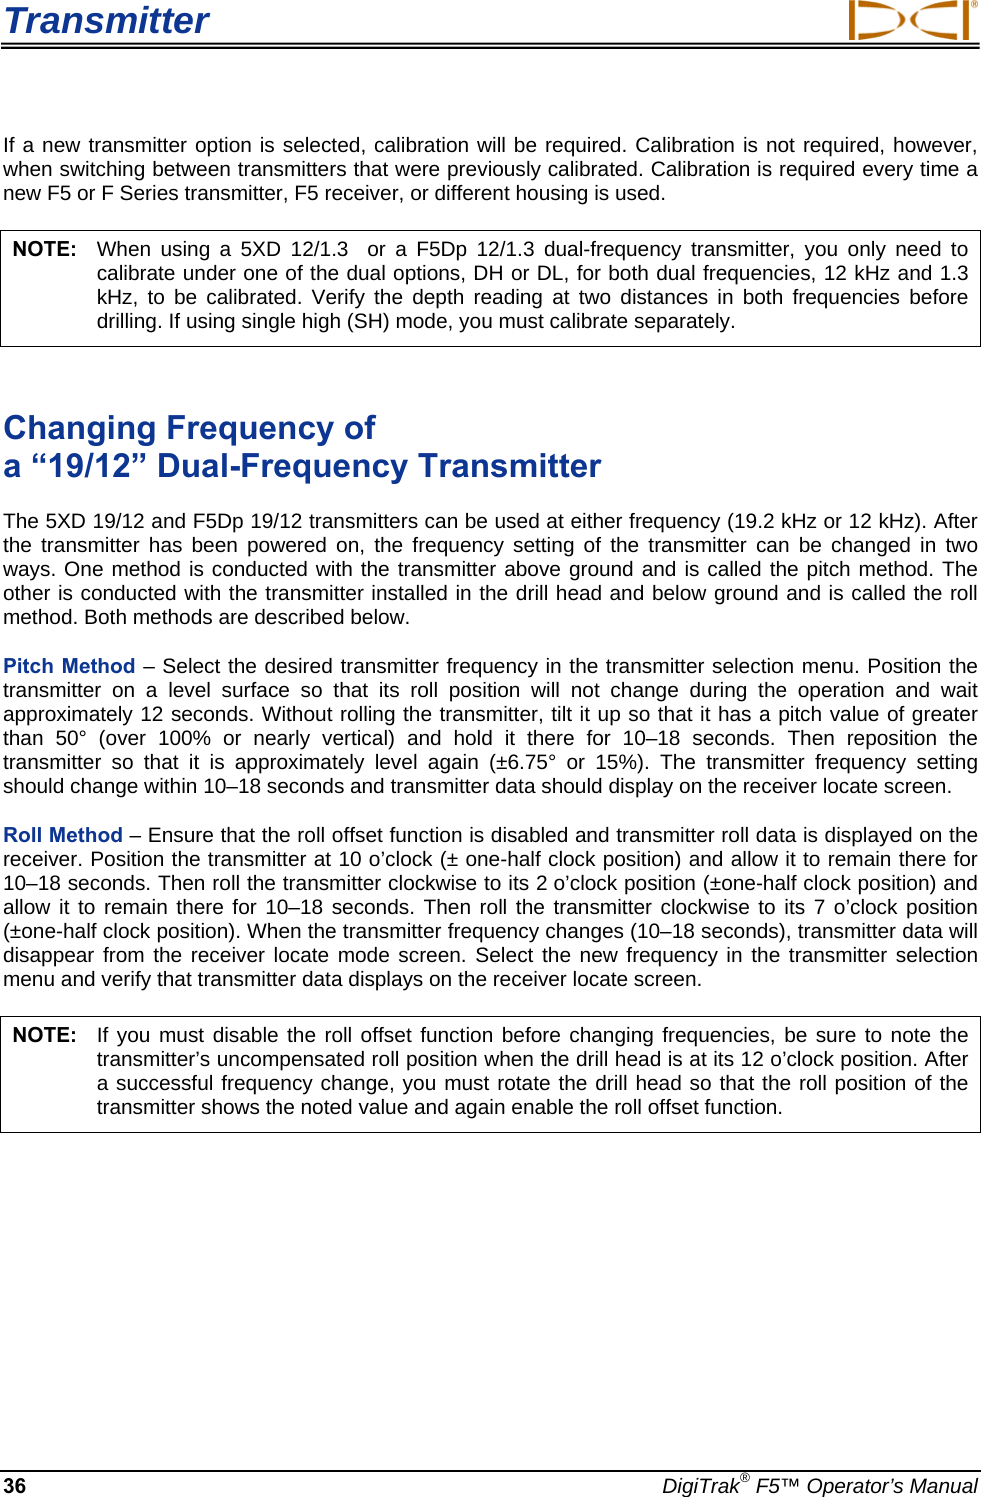 Transmitter     36  DigiTrak® F5™ Operator’s Manual If a new transmitter option is selected, calibration will be required. Calibration is not required, however, when switching between transmitters that were previously calibrated. Calibration is required every time a new F5 or F Series transmitter, F5 receiver, or different housing is used.   NOTE:   When using a 5XD 12/1.3  or a F5Dp 12/1.3 dual-frequency transmitter, you only need to calibrate under one of the dual options, DH or DL, for both dual frequencies, 12 kHz and 1.3 kHz, to be calibrated. Verify the depth reading at two distances in both frequencies before drilling. If using single high (SH) mode, you must calibrate separately.  Changing Frequency of  a “19/12” Dual-Frequency Transmitter The 5XD 19/12 and F5Dp 19/12 transmitters can be used at either frequency (19.2 kHz or 12 kHz). After the transmitter has been powered on, the frequency setting of the transmitter can be changed in two ways. One method is conducted with the transmitter above ground and is called the pitch method. The other is conducted with the transmitter installed in the drill head and below ground and is called the roll method. Both methods are described below. Pitch Method – Select the desired transmitter frequency in the transmitter selection menu. Position the transmitter on a level surface so that its roll position will not change during the operation and wait approximately 12 seconds. Without rolling the transmitter, tilt it up so that it has a pitch value of greater than 50° (over 100% or nearly vertical) and hold it there for 10–18 seconds. Then reposition the transmitter so that it is approximately level again (±6.75° or 15%). The transmitter frequency setting should change within 10–18 seconds and transmitter data should display on the receiver locate screen. Roll Method – Ensure that the roll offset function is disabled and transmitter roll data is displayed on the receiver. Position the transmitter at 10 o’clock (± one-half clock position) and allow it to remain there for 10–18 seconds. Then roll the transmitter clockwise to its 2 o’clock position (±one-half clock position) and allow it to remain there for 10–18 seconds. Then roll the transmitter clockwise to its 7 o’clock position (±one-half clock position). When the transmitter frequency changes (10–18 seconds), transmitter data will disappear from the receiver locate mode screen. Select the new frequency in the transmitter selection menu and verify that transmitter data displays on the receiver locate screen. NOTE:  If you must disable the roll offset function before changing frequencies, be sure to note the transmitter’s uncompensated roll position when the drill head is at its 12 o’clock position. After a successful frequency change, you must rotate the drill head so that the roll position of the transmitter shows the noted value and again enable the roll offset function. 